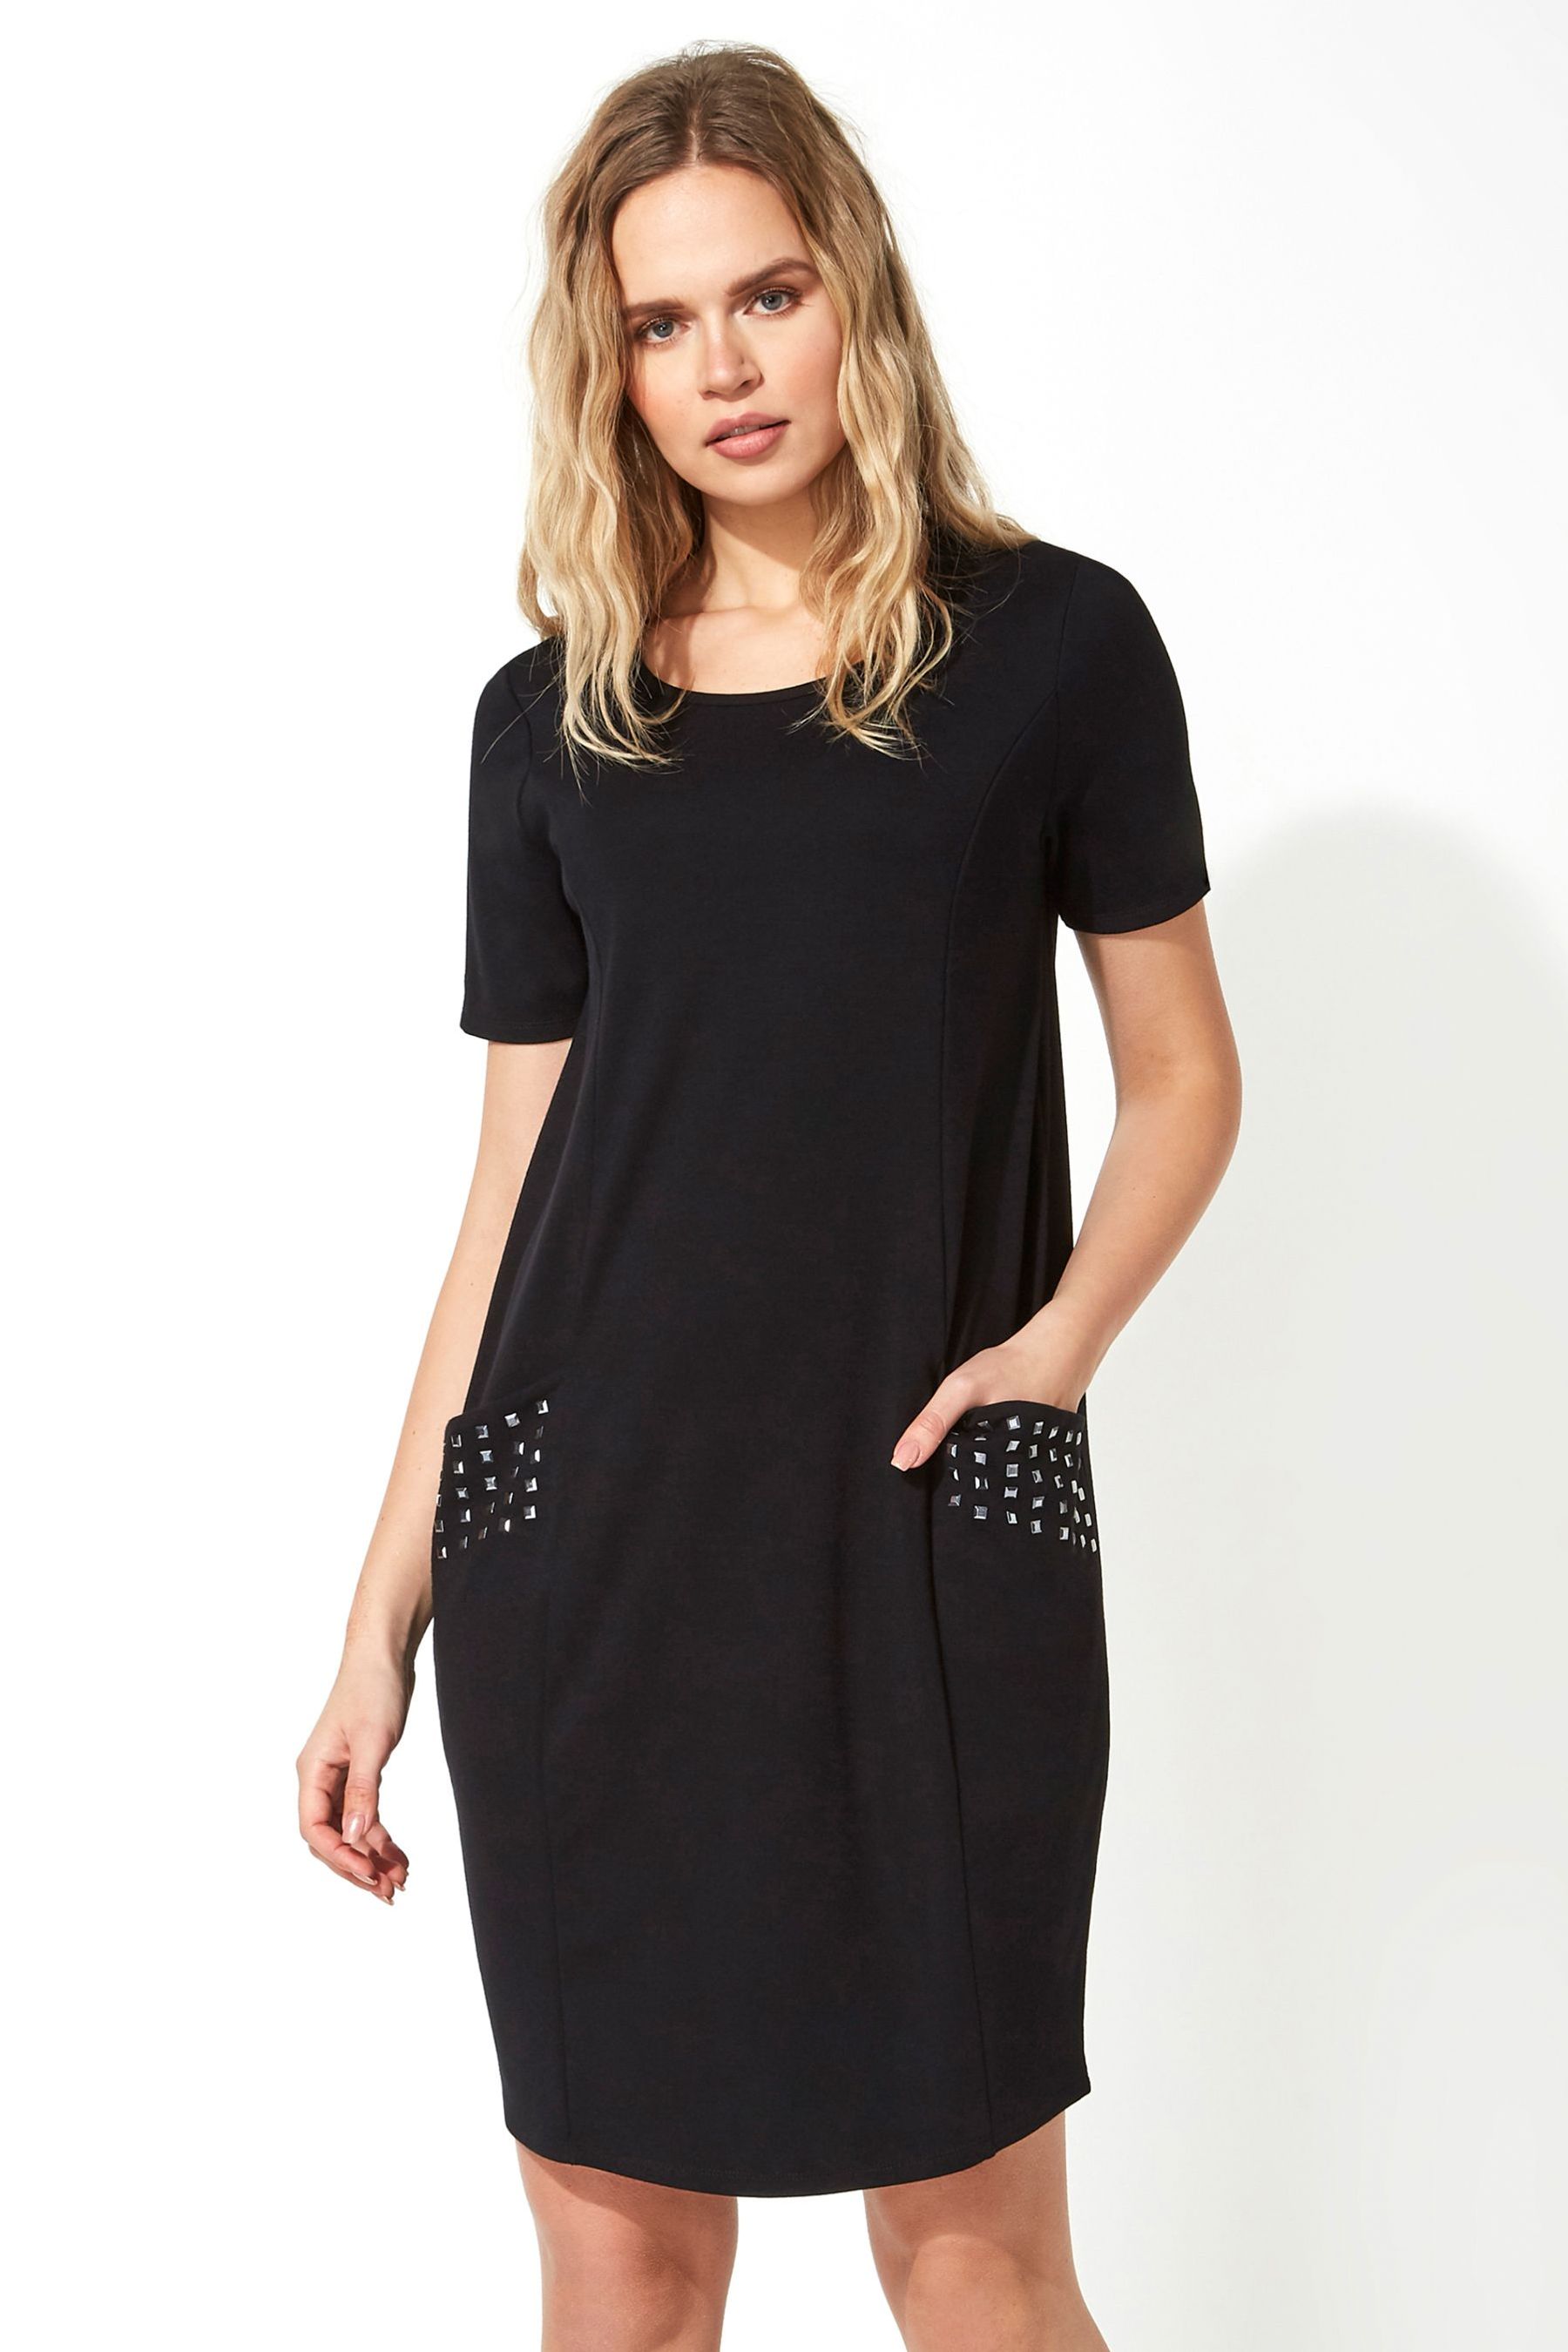 Buy Roman Pocket Stud Detail Slouch Dress from the Next UK online shop